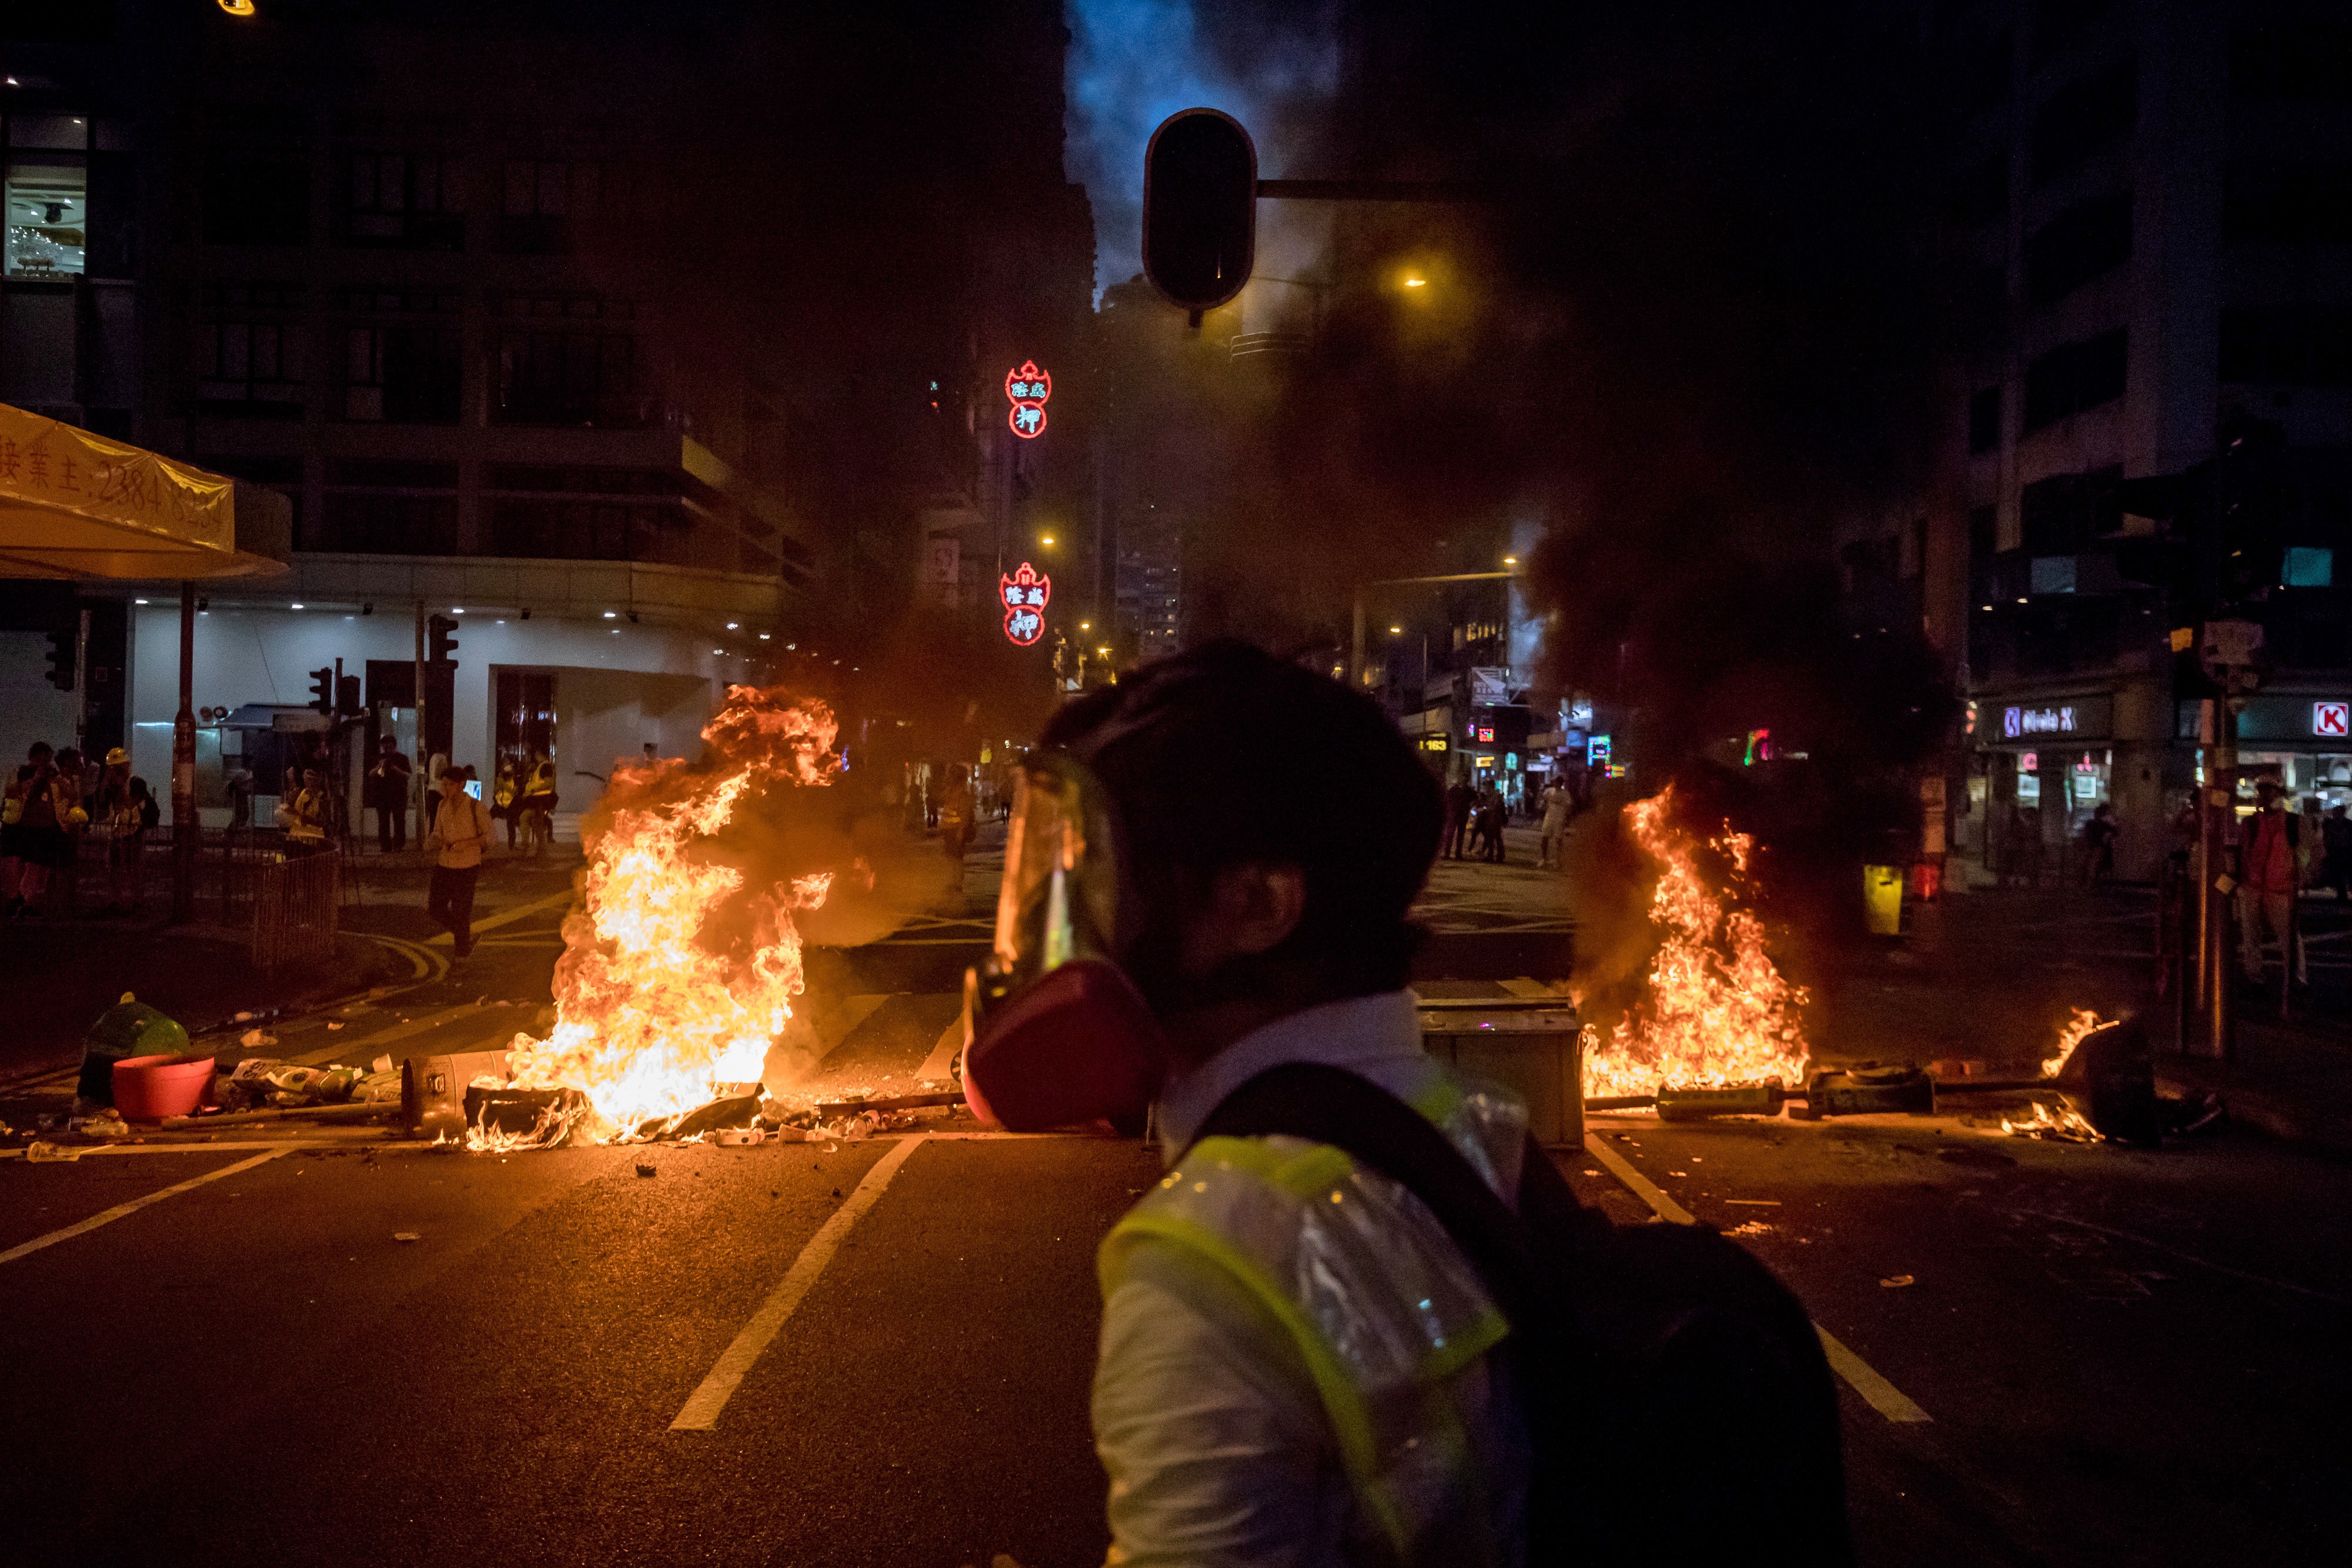 Hong Kong’s protests have turned violent. Photo: Bloomberg